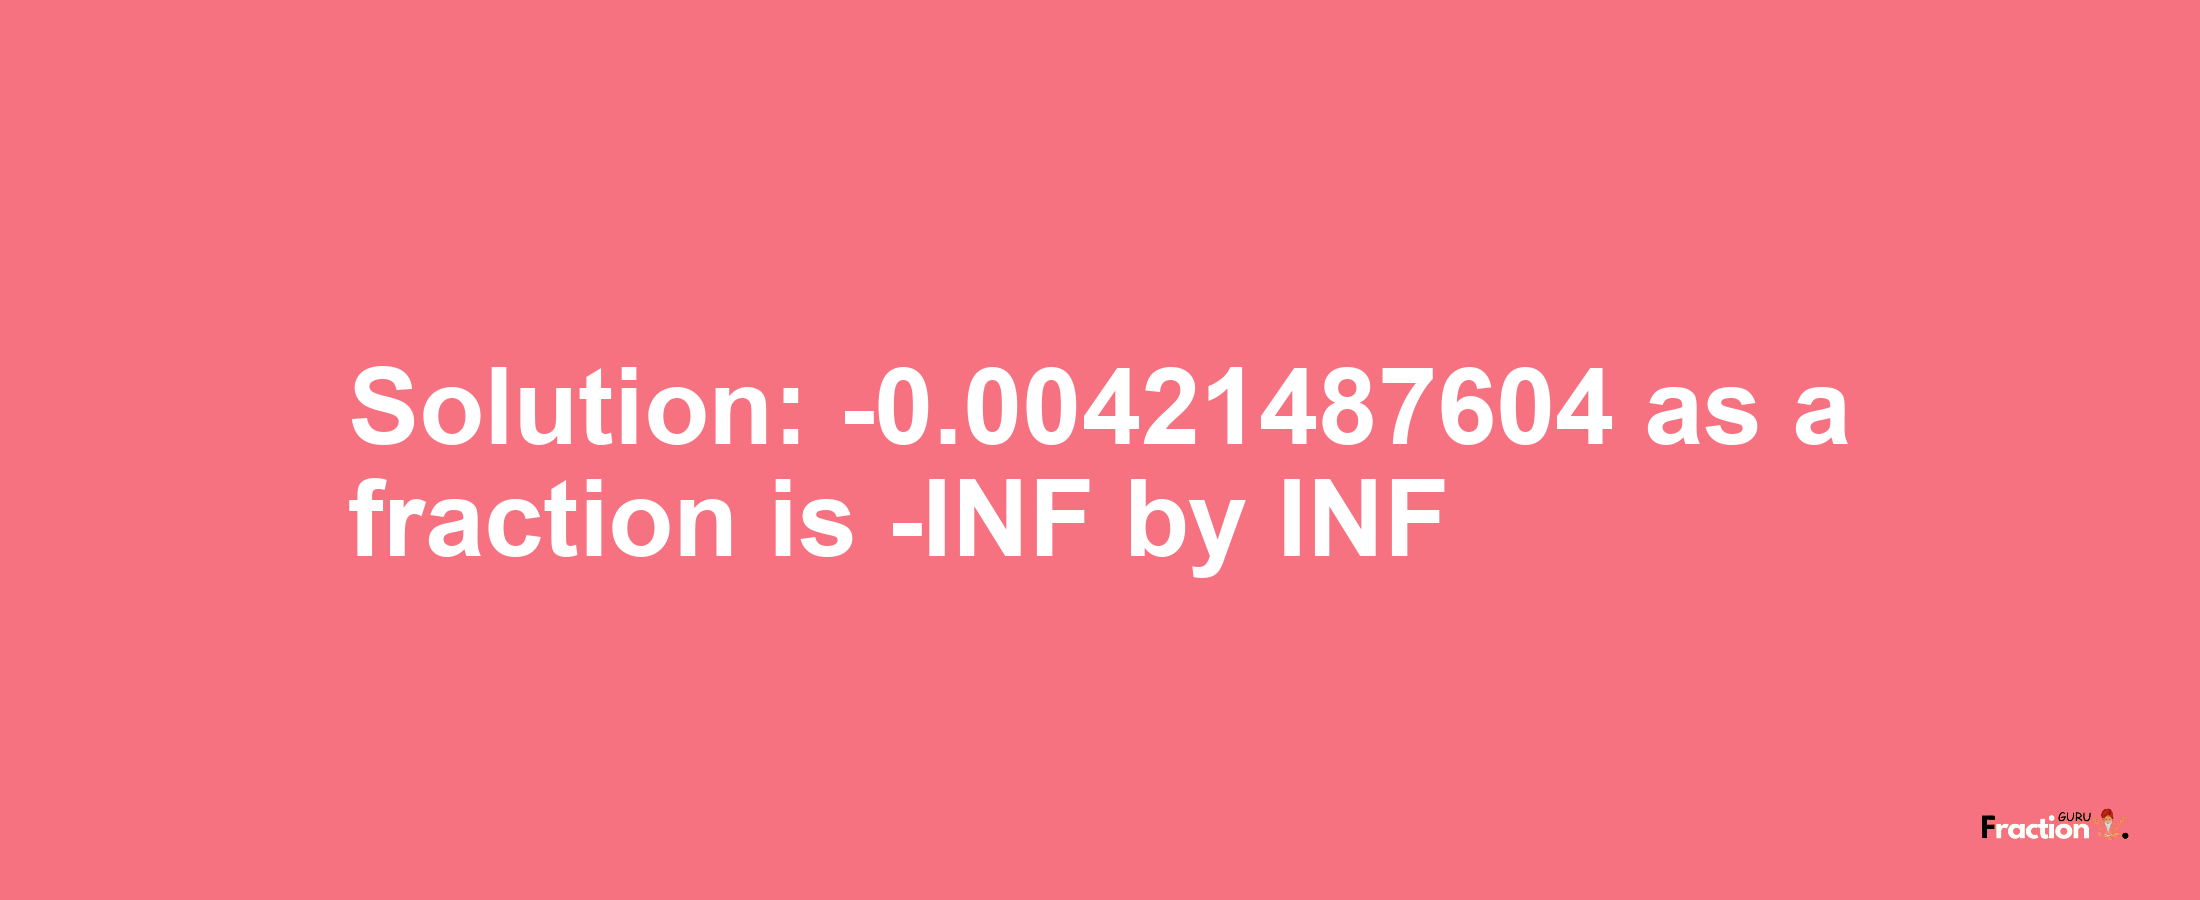 Solution:-0.00421487604 as a fraction is -INF/INF